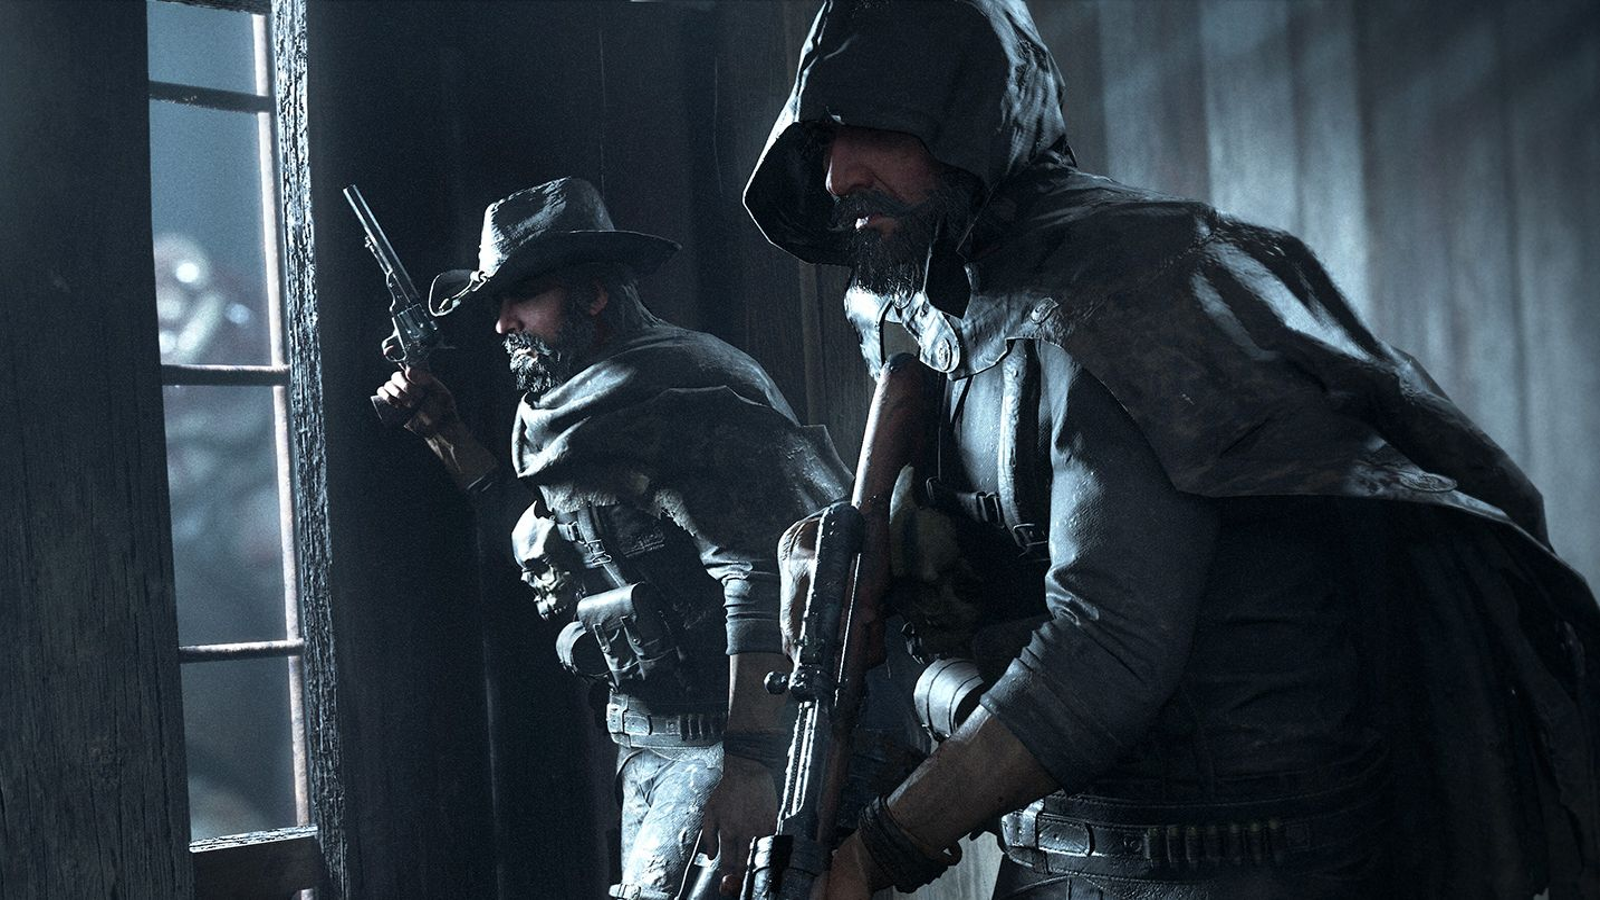 Hunt: Showdown is now available in Steam Early Access